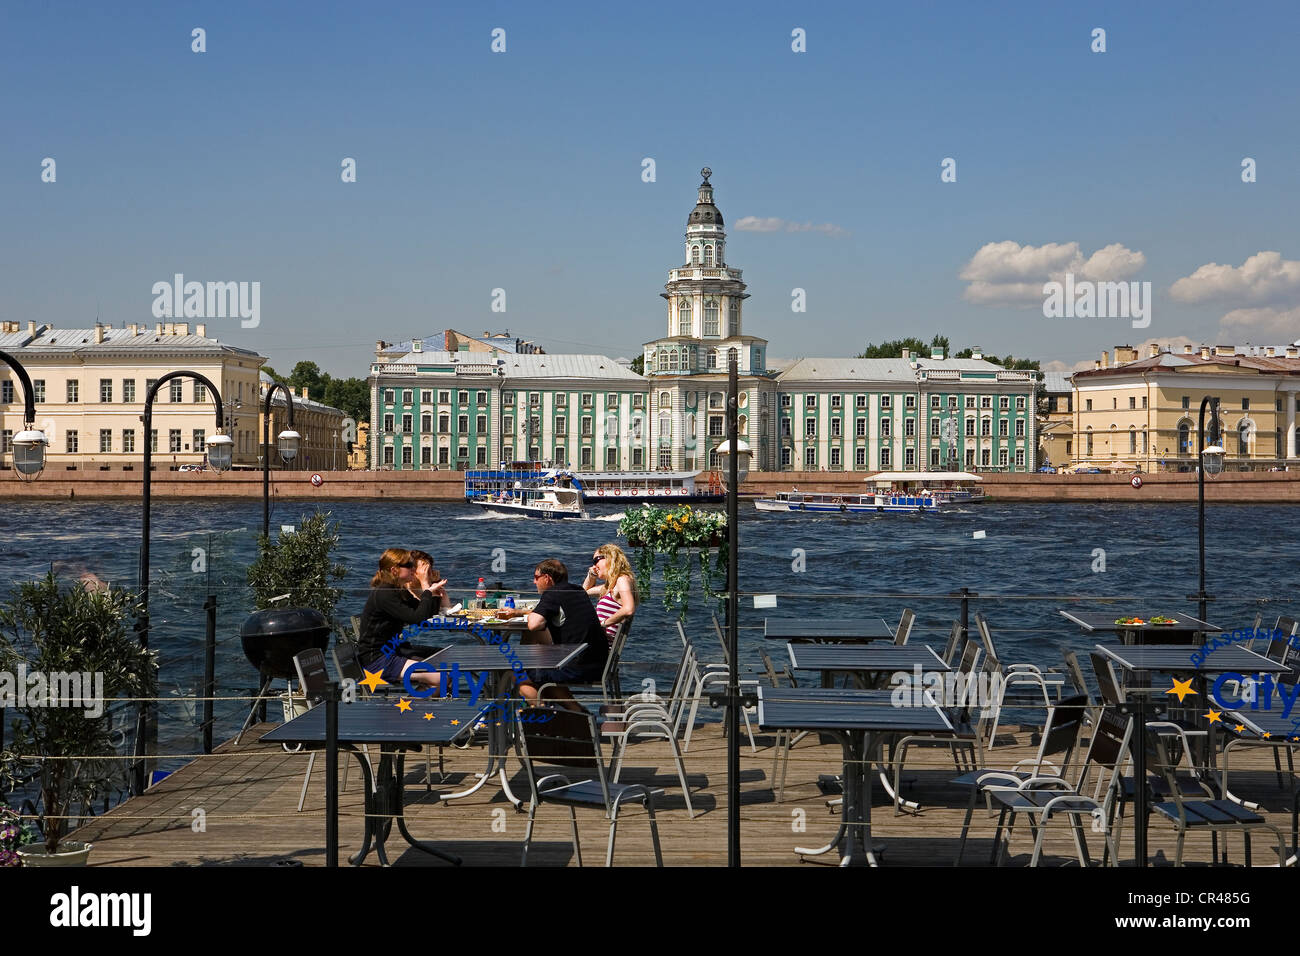 Russia, St Petersburg, UNESCO World Heritage, cafe terrace in front of Neva River and Kuntskamera (Anthropology and Ethnology Stock Photo